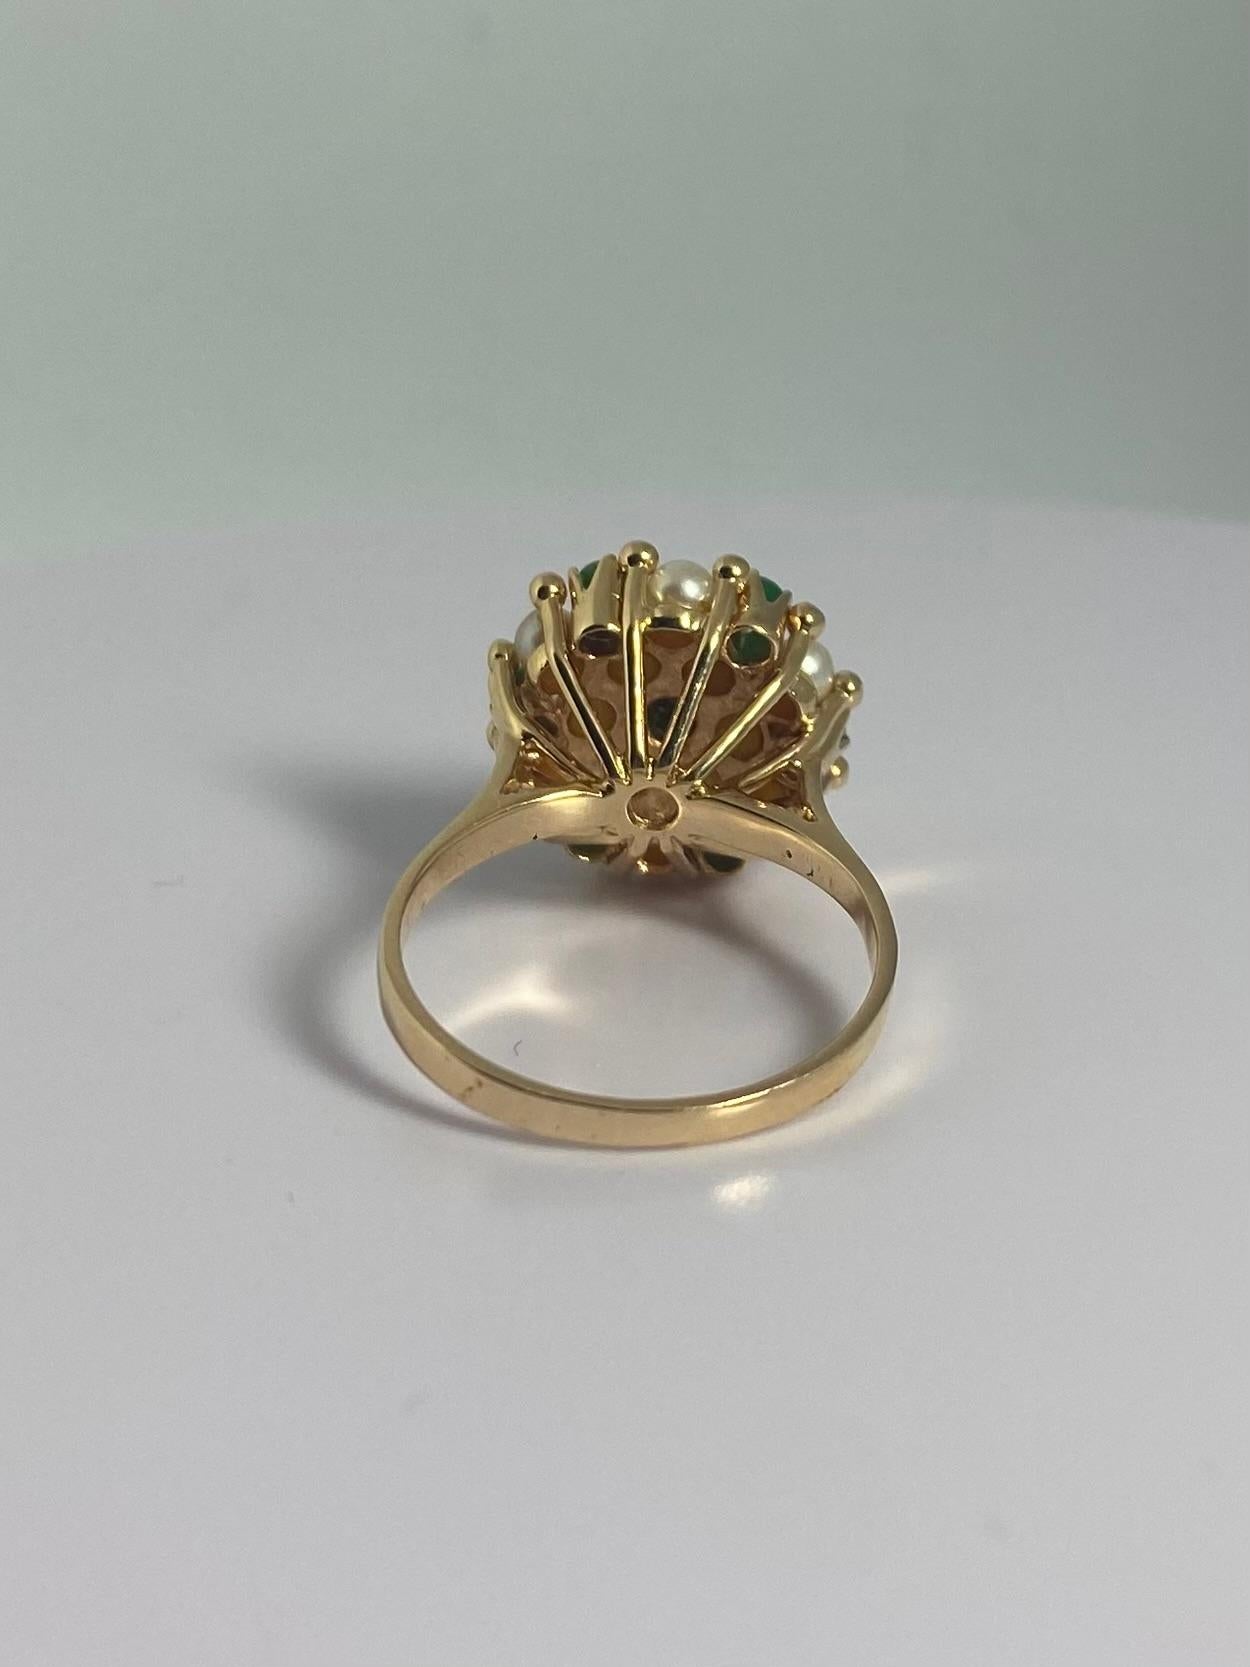 Romantic 18 Carat Yellow Golden Cocktail Ring with Pearls and Jade Nephrites For Sale